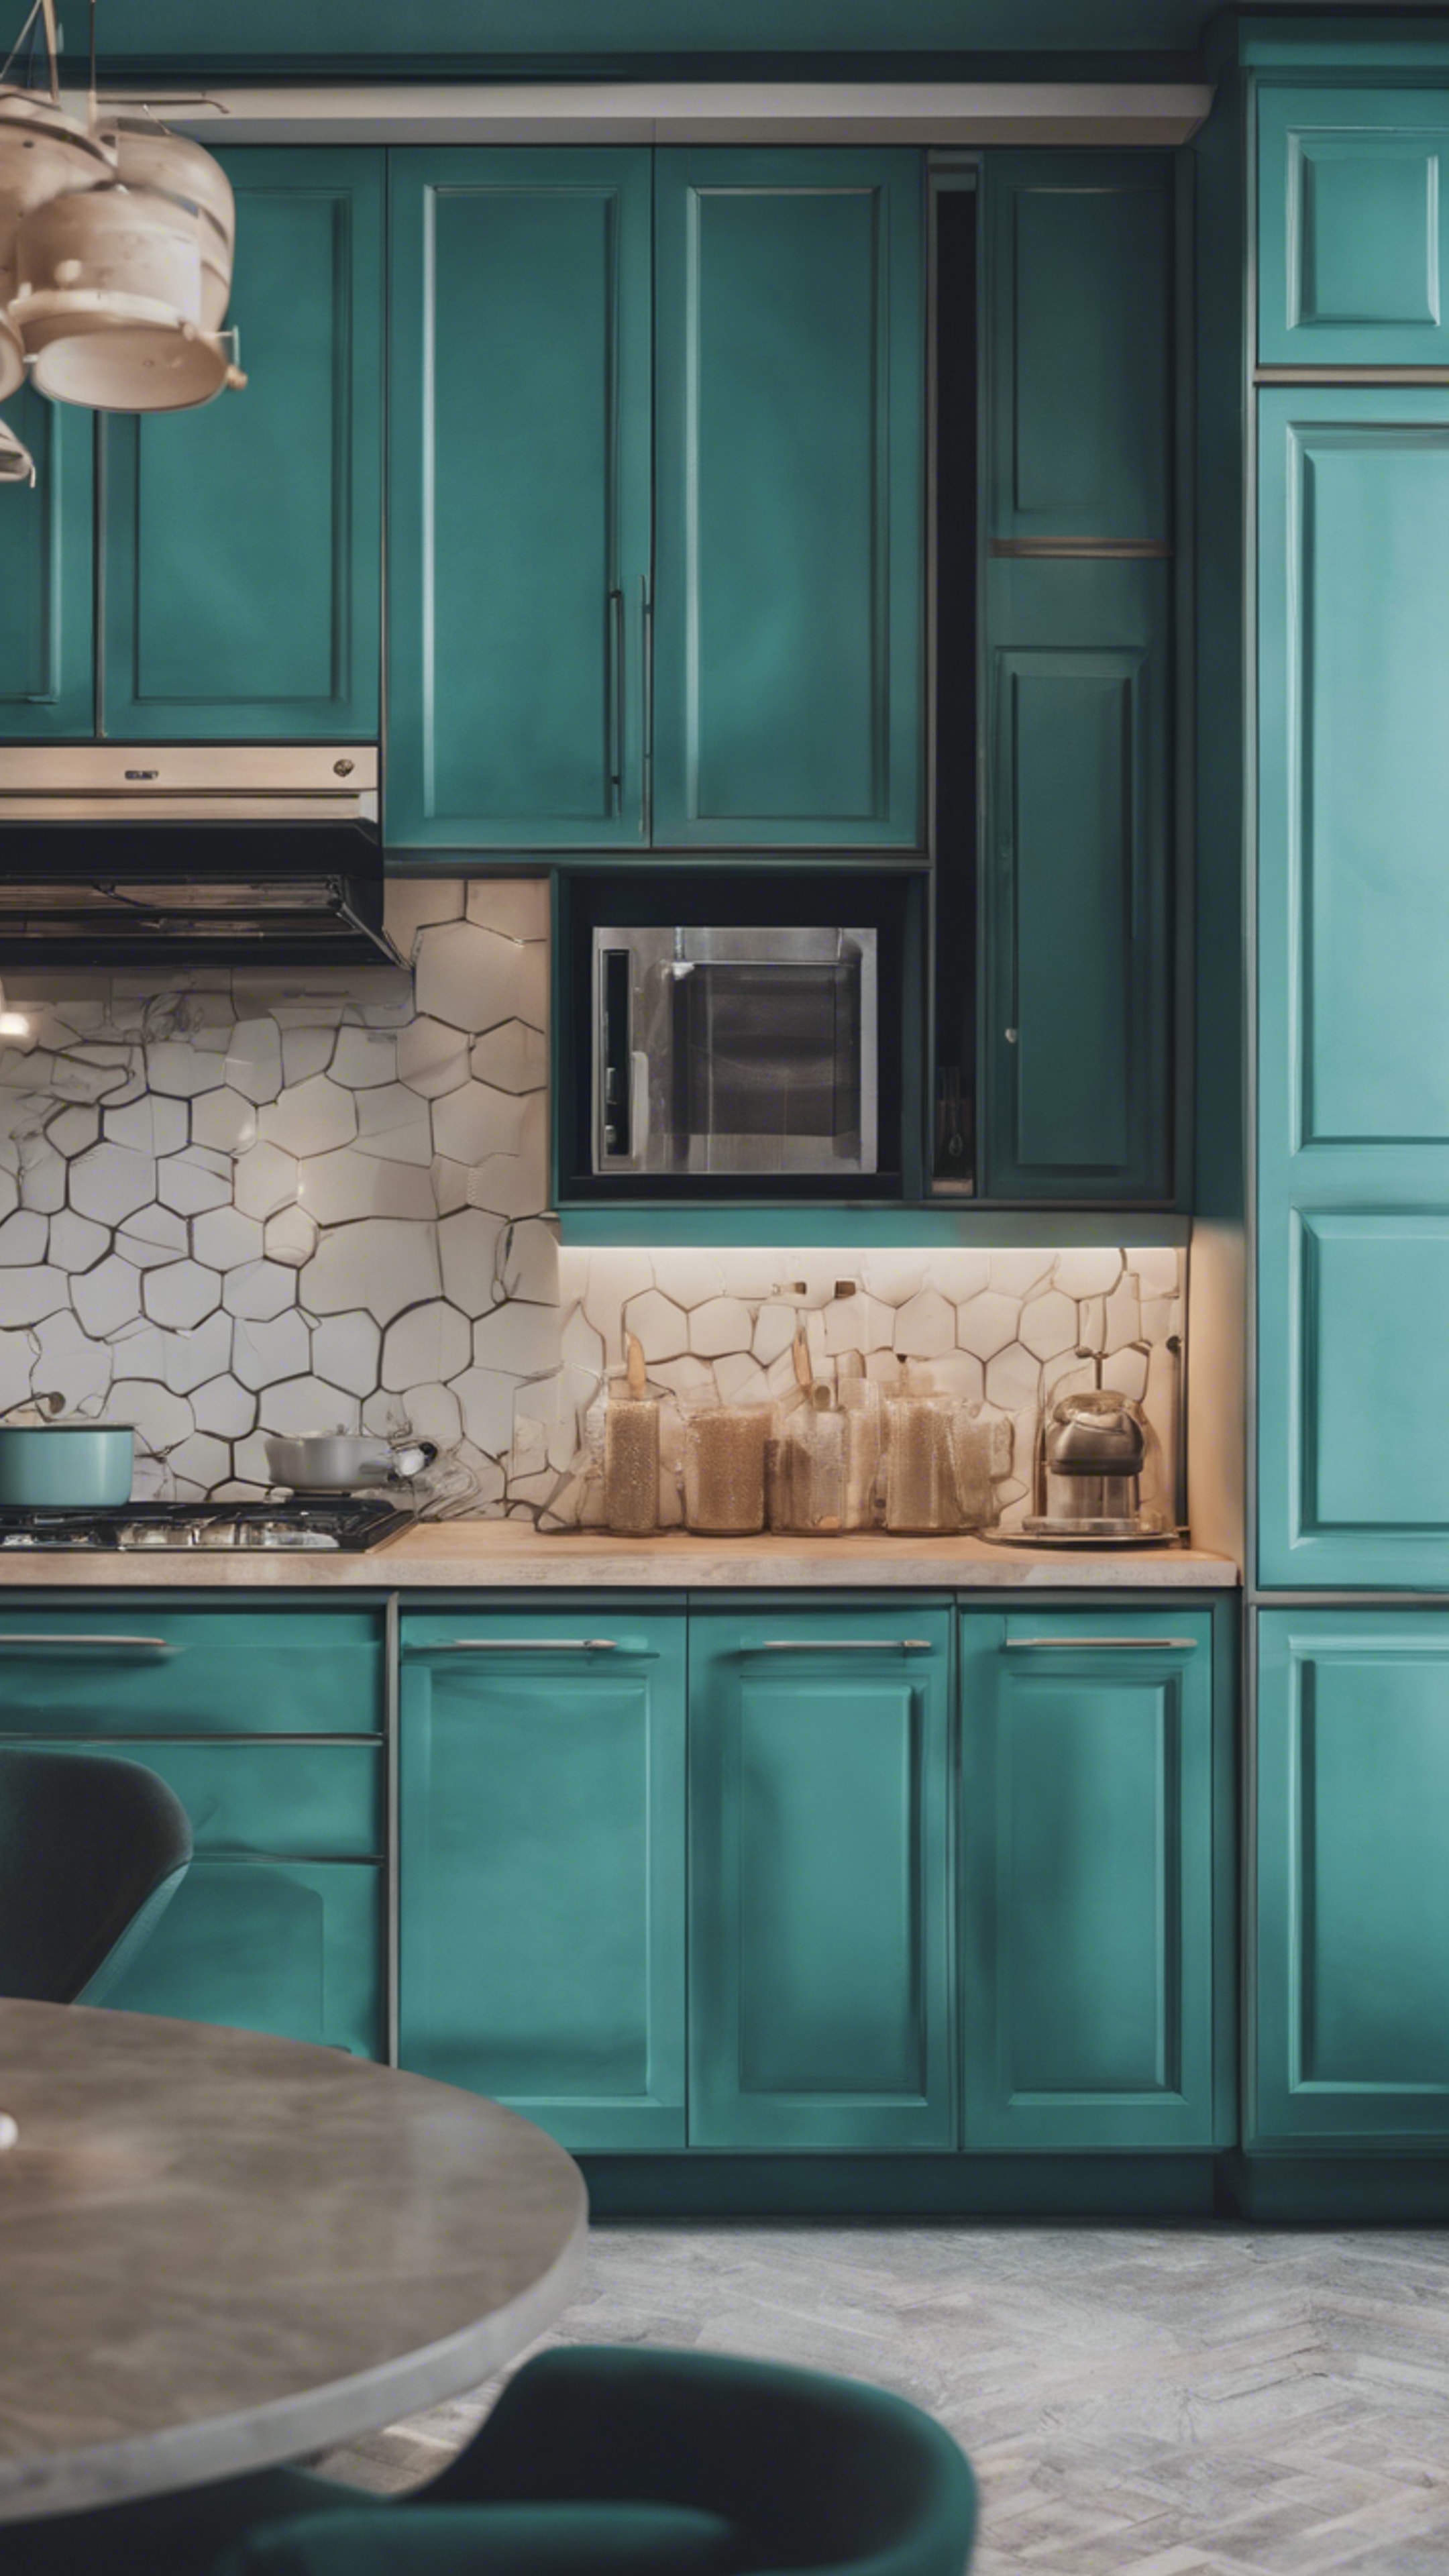 A modern kitchen design dominated by the cool teal color scheme.壁紙[5d7f72f16c9b4154a26c]